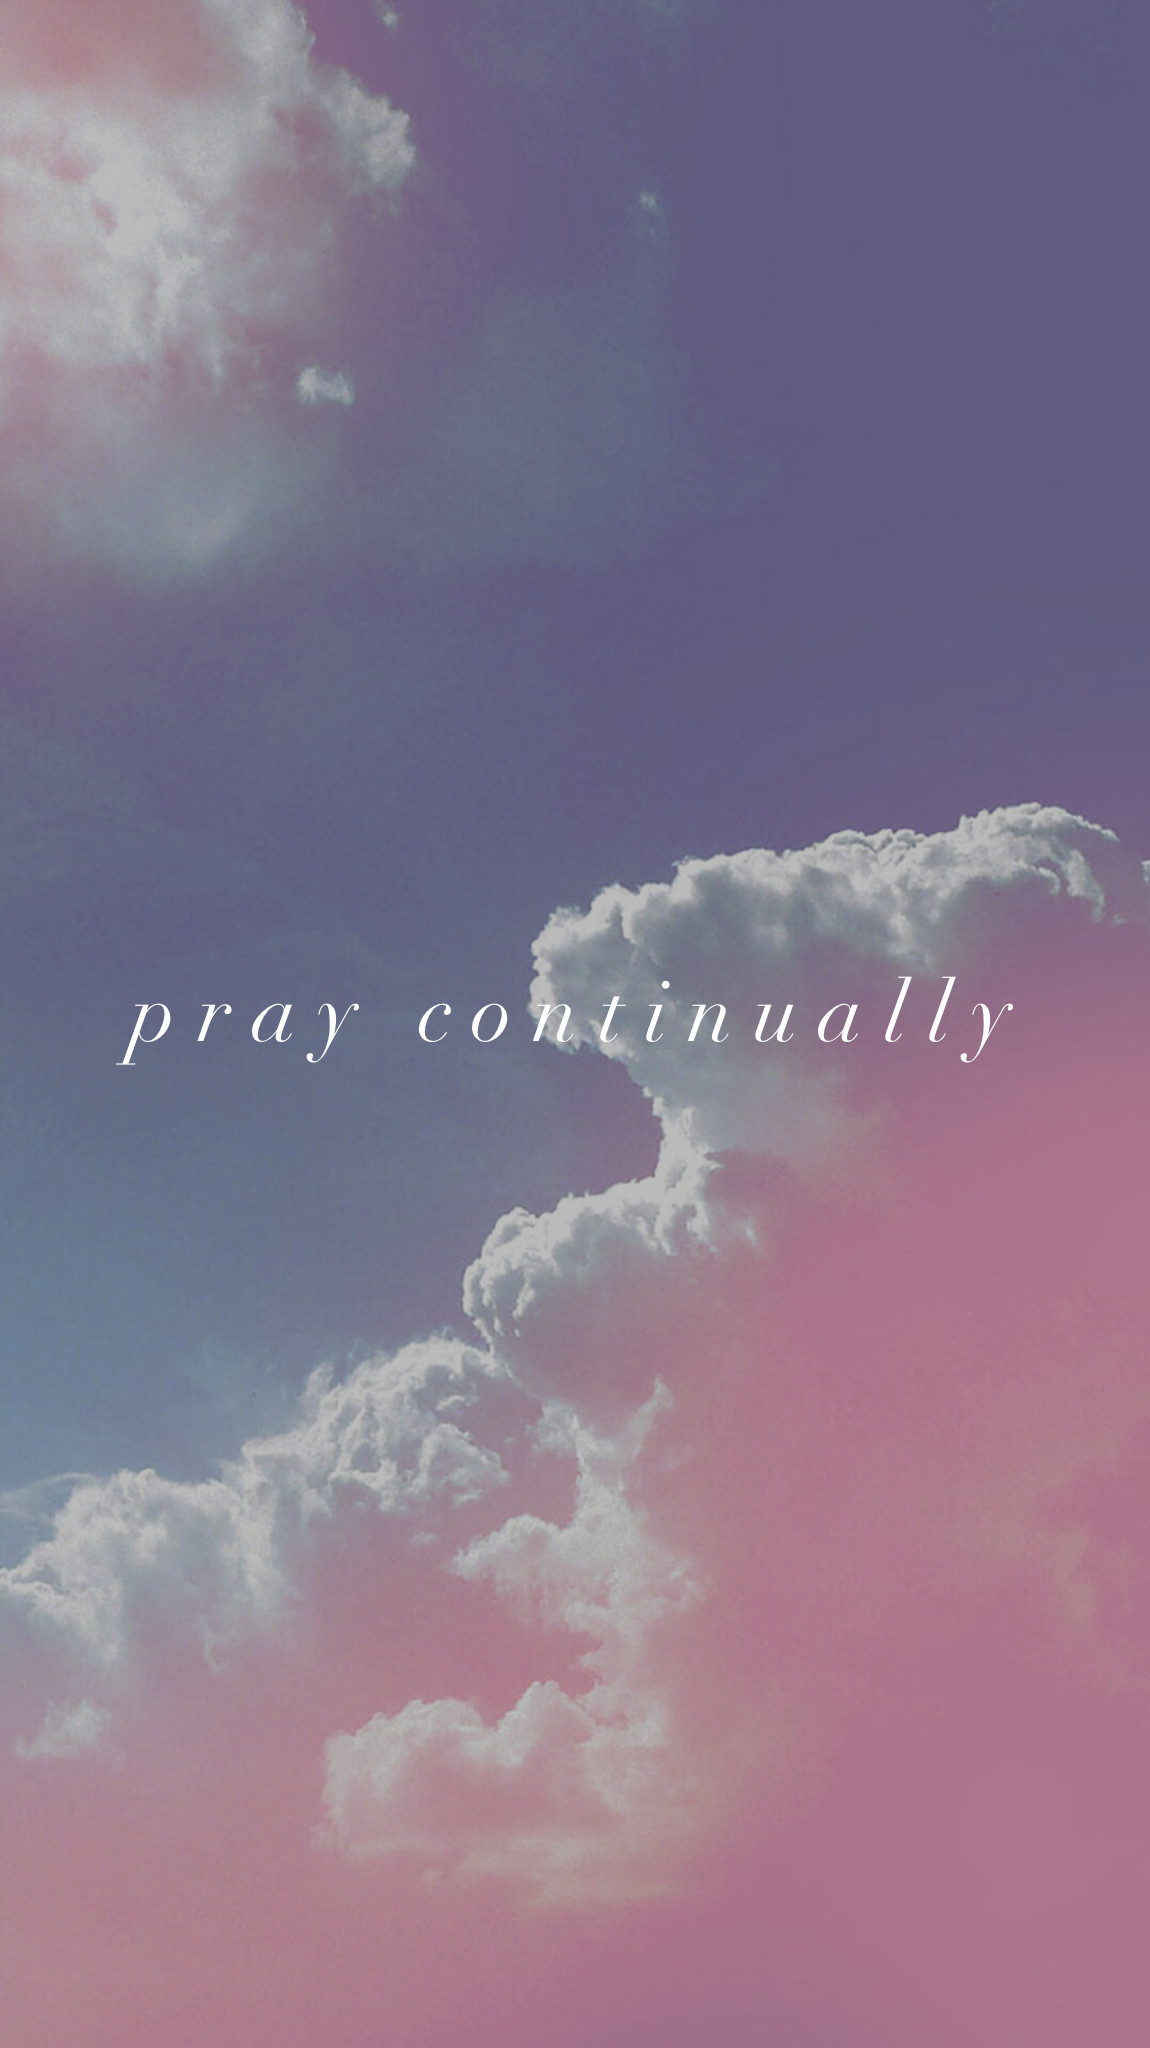 Pray Continually Pastel Aesthetic Clouds Background 1150x2048 Wallpaper Teahub Io 2086 x 1187 png 1023 kb. pastel aesthetic clouds background